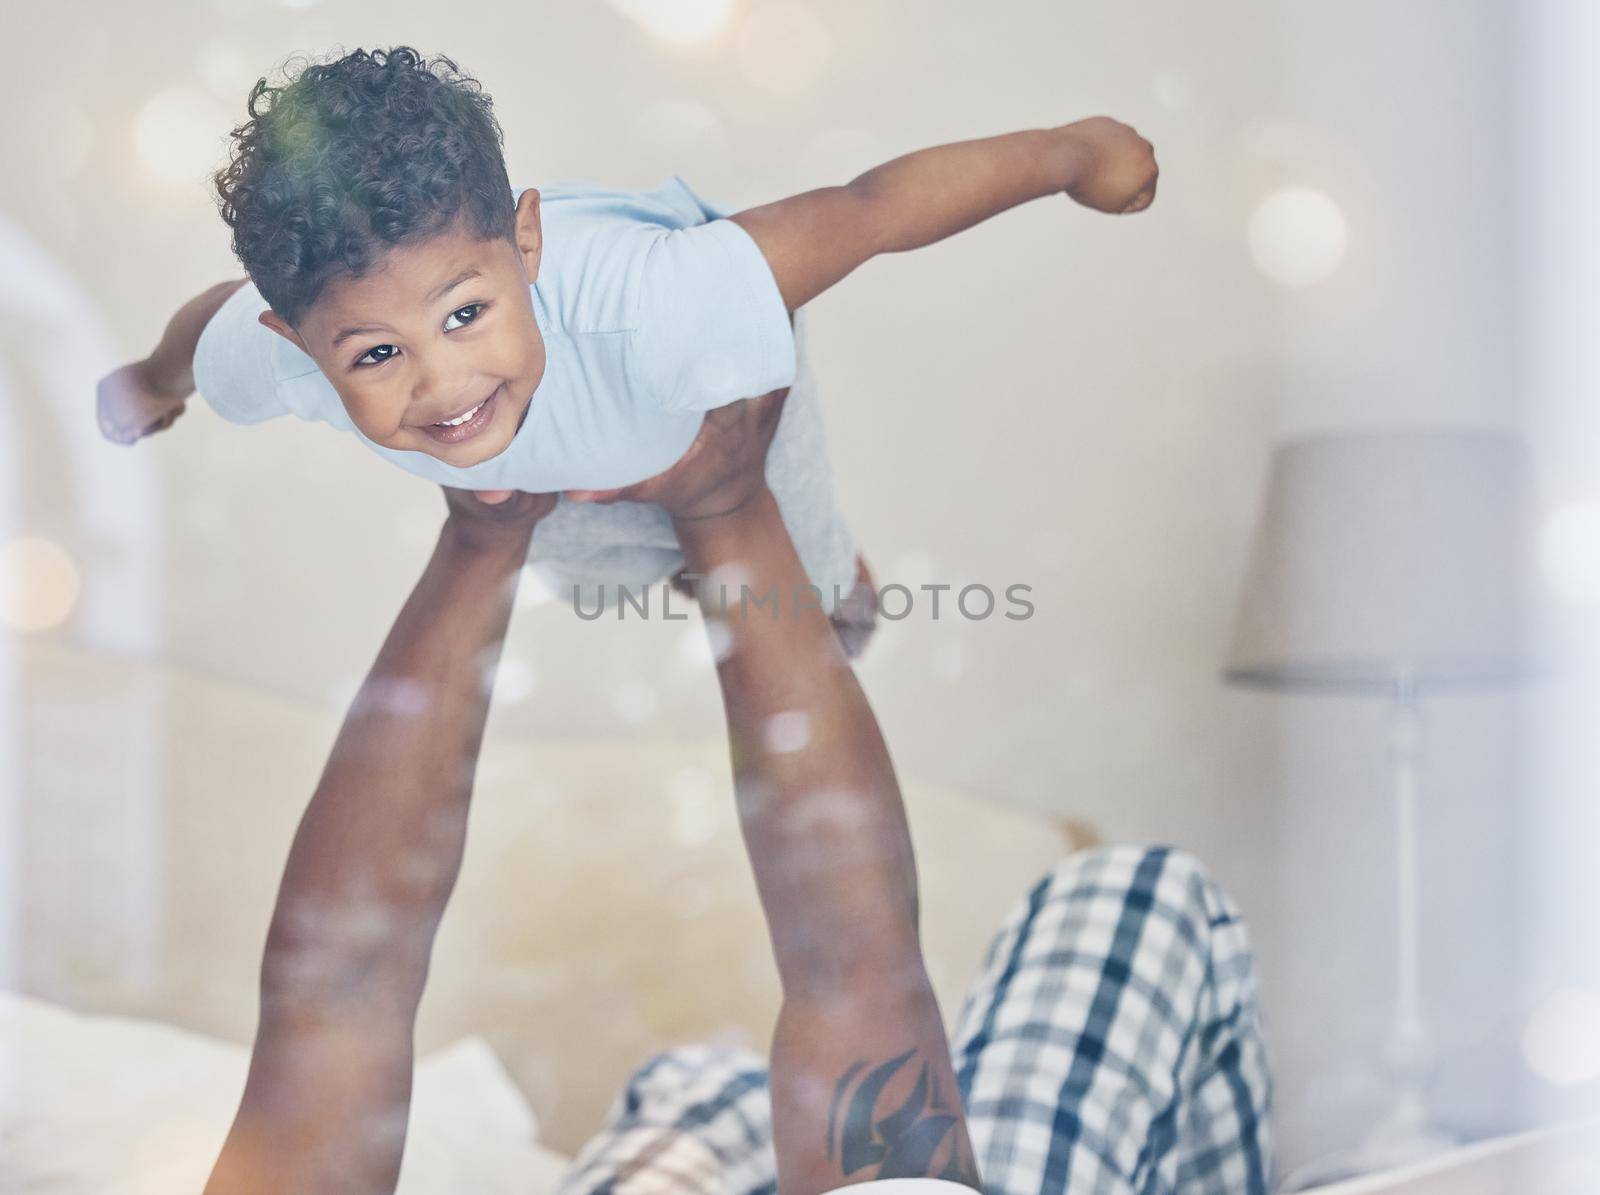 Happy little mixed race boy flying in fathers arms looking at camera in bedroom. Dad holding and lifting cute little child playing and having fun on bed.